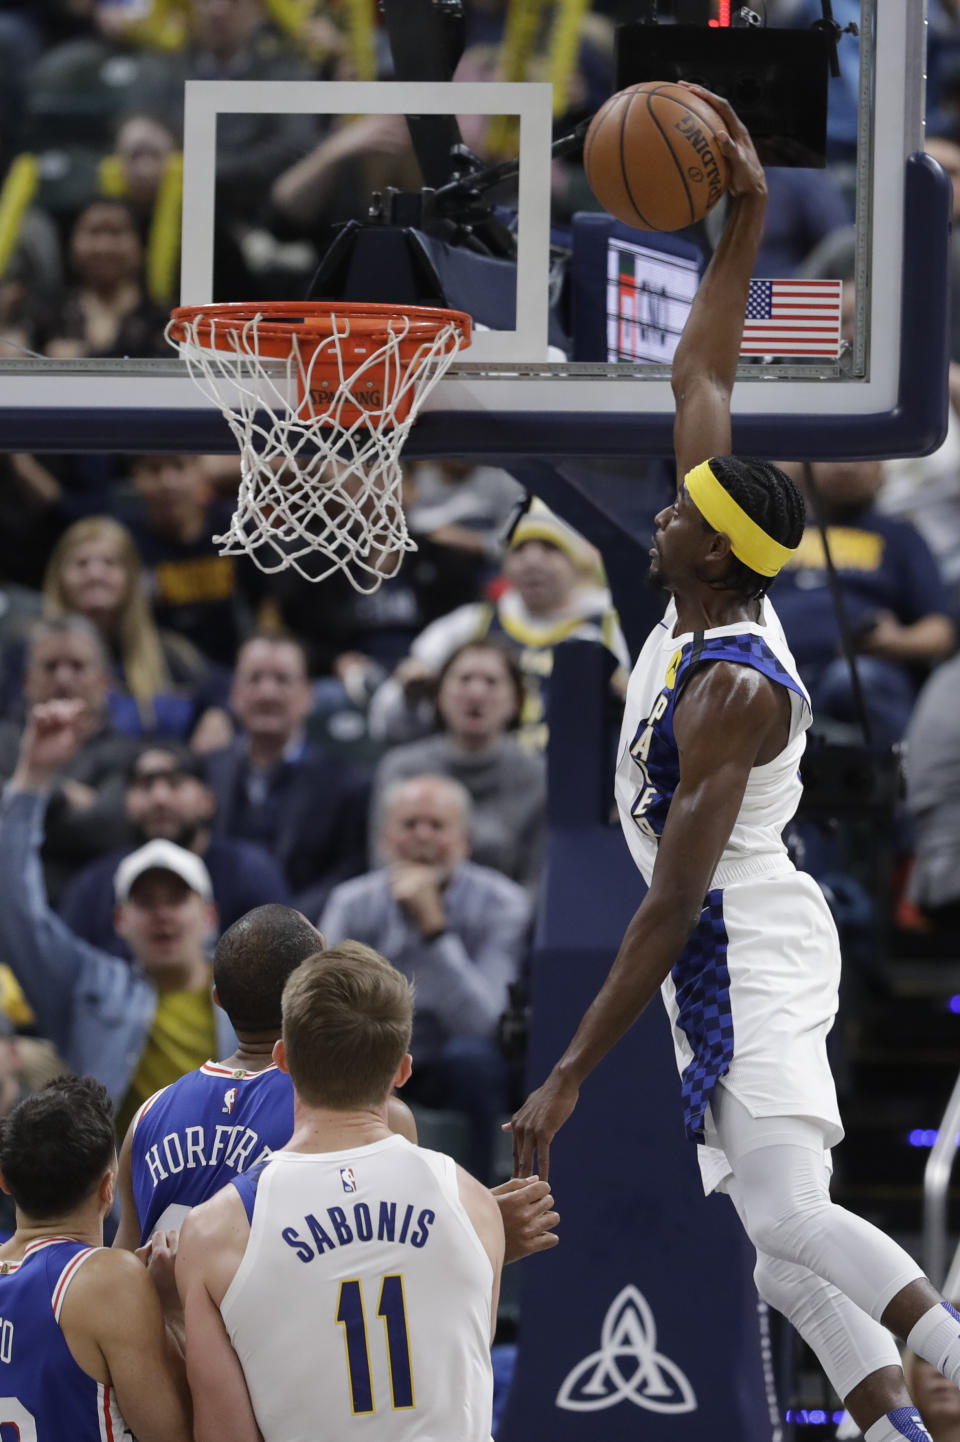 Indiana Pacers' Justin Holiday (8) dunks during the second half of an NBA basketball game against the Philadelphia 76ers, Monday, Jan. 13, 2020, in Indianapolis. Indiana won 101-95. (AP Photo/Darron Cummings)